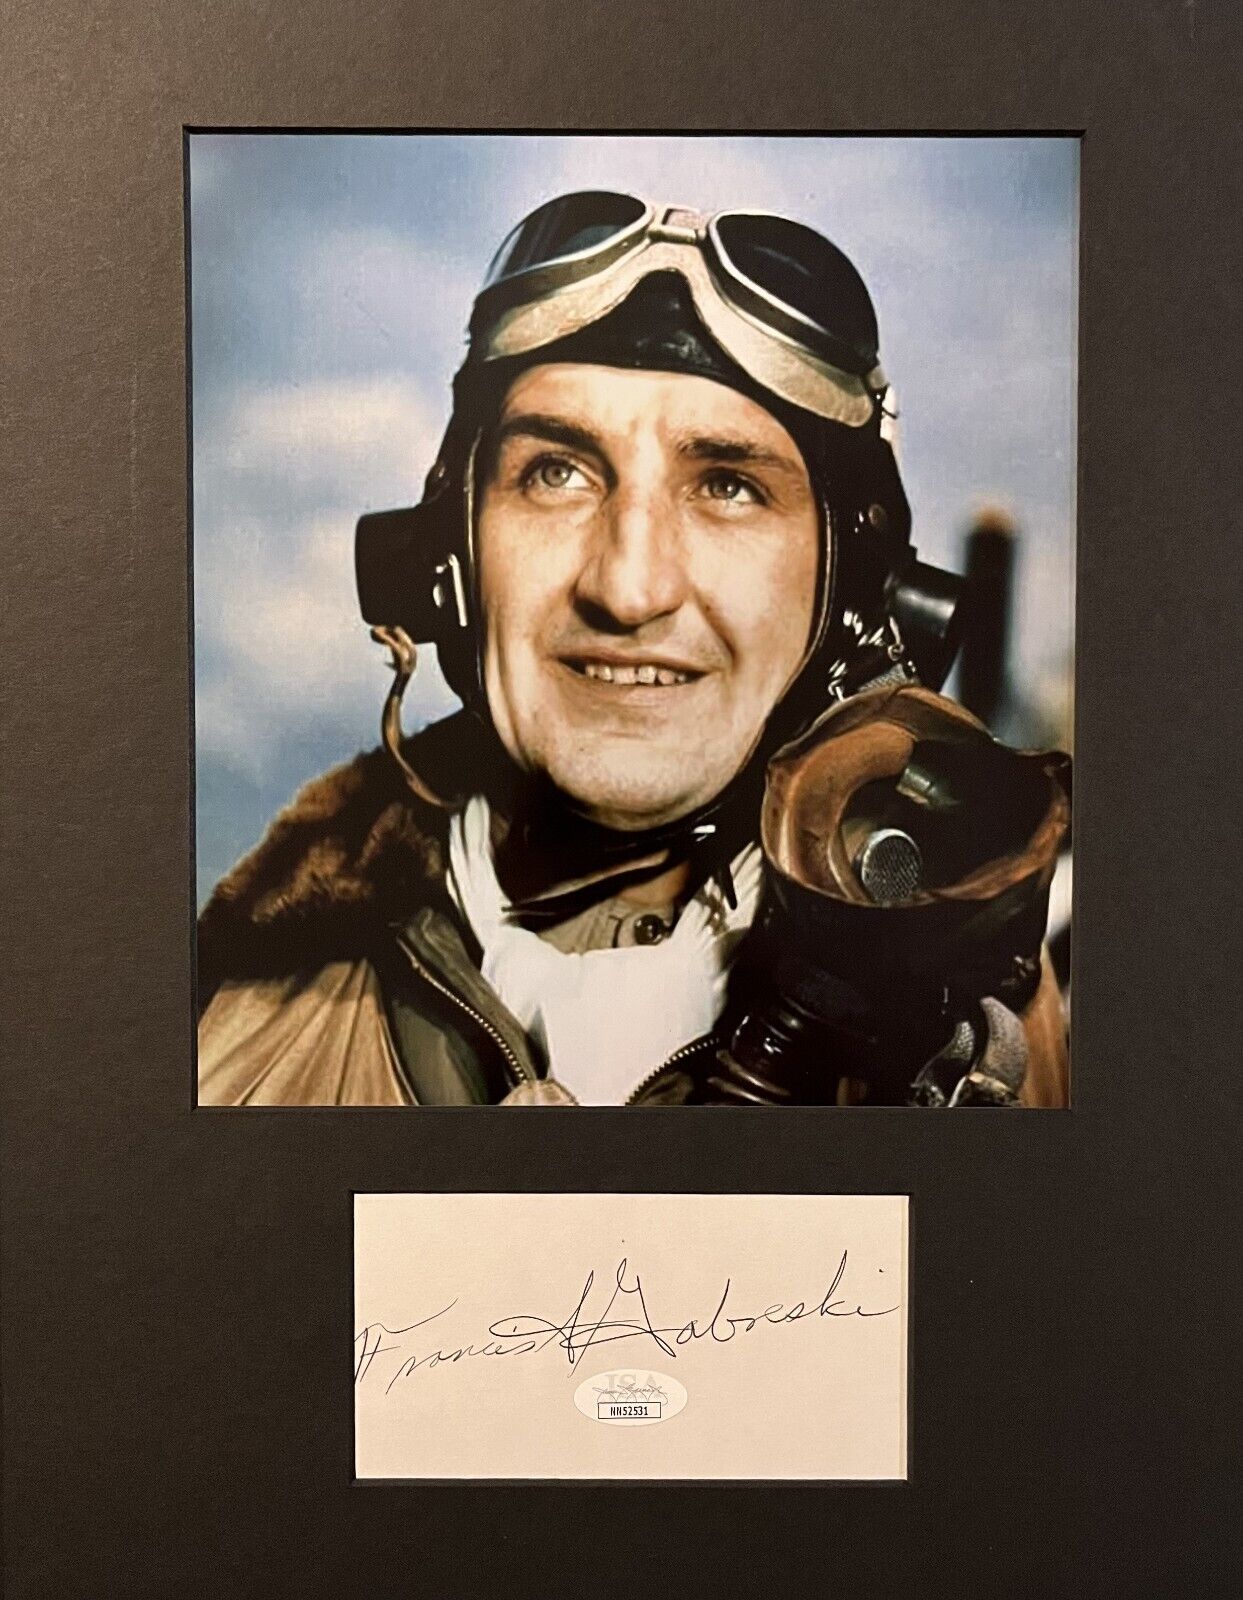 Colonel Gabby Gabreski WWII Ace Pilot 28 Vic, 56th Fighter Group JSA SIGNED CUT